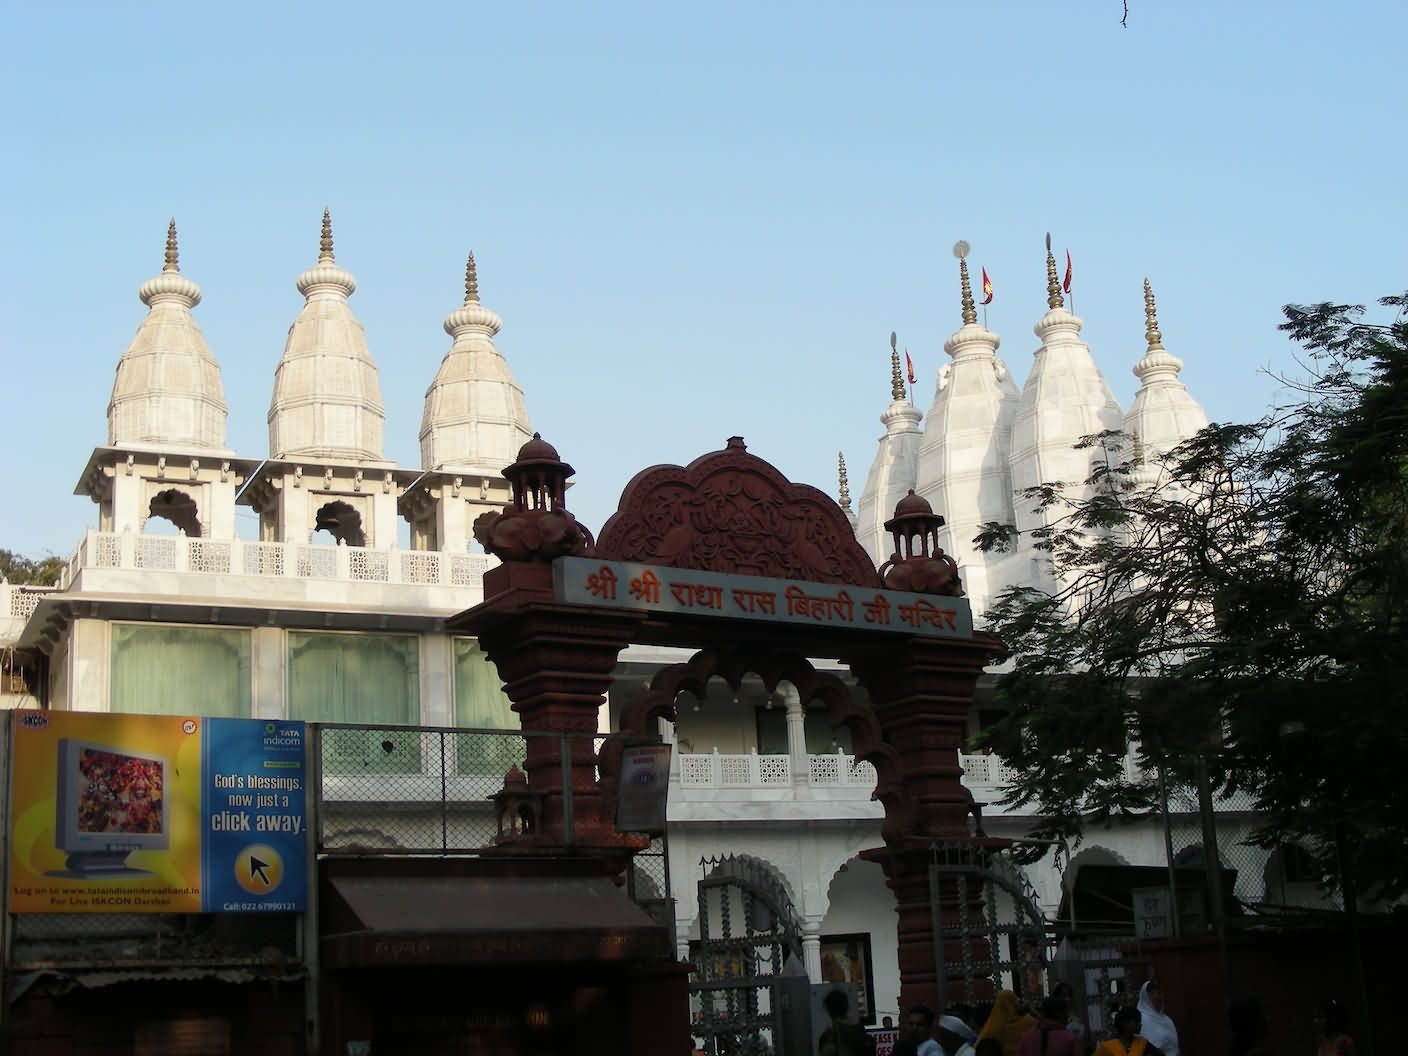 Hare Ram Hare Krishna Mandir, Timings, Guide and How to reach